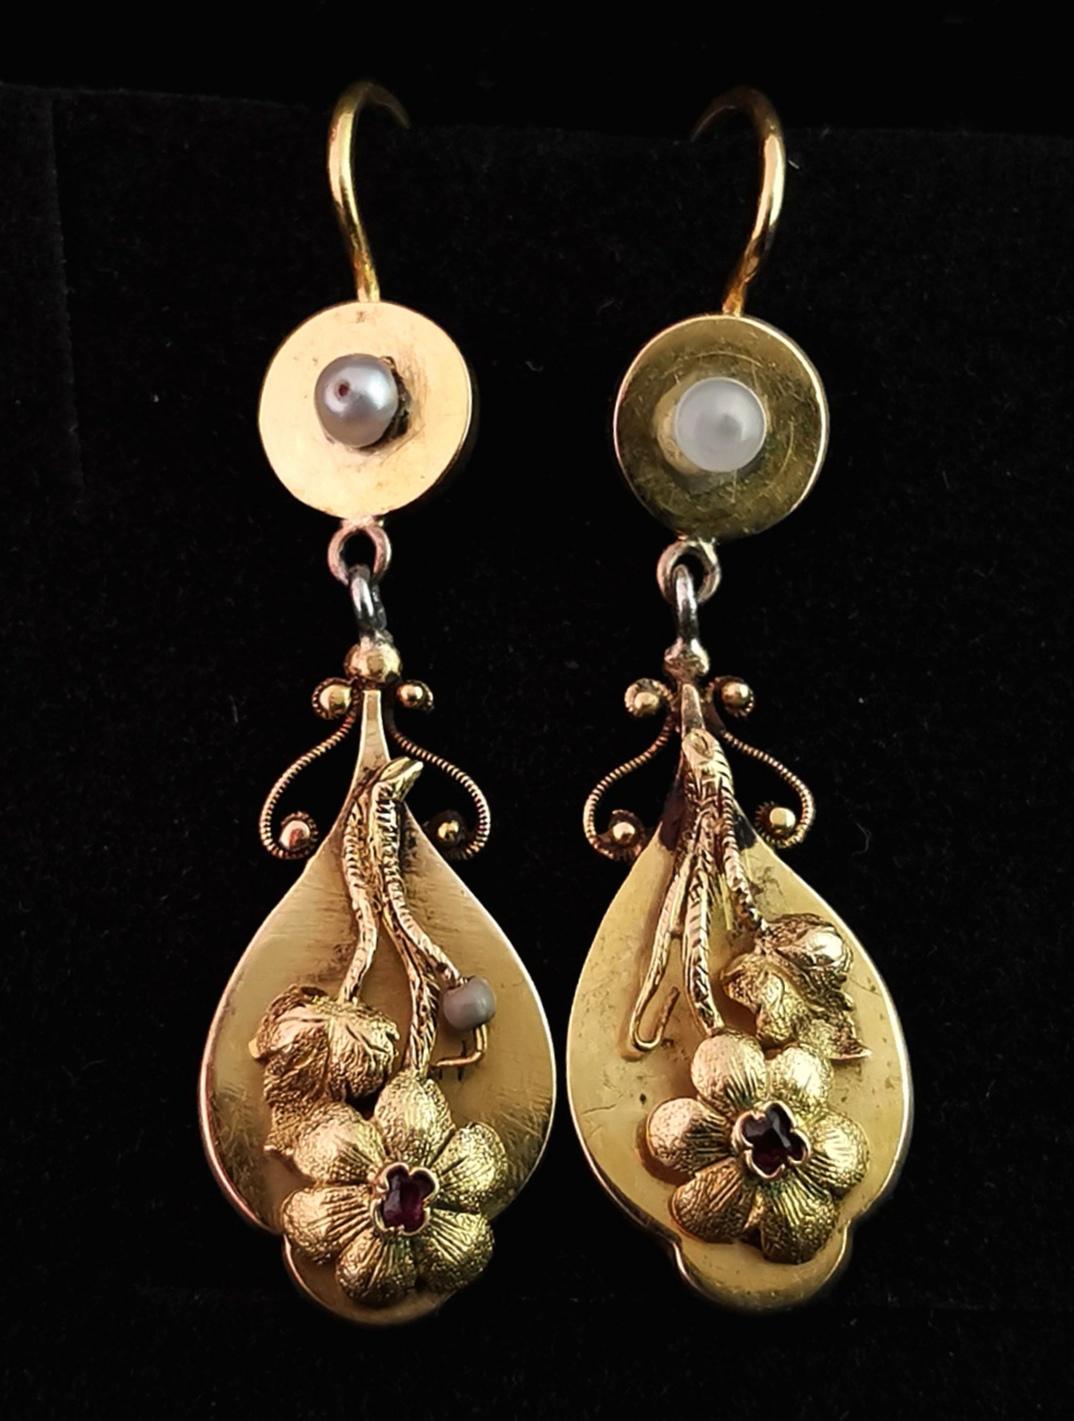 A gorgeous pair of Antique late Georgian gold drop earrings.

They have a stunning teardrop shaped lower half that has intricate applied gold flowers each set with a Ruby, the drops feature delicate tendrils and leafs.

The main drops are suspended